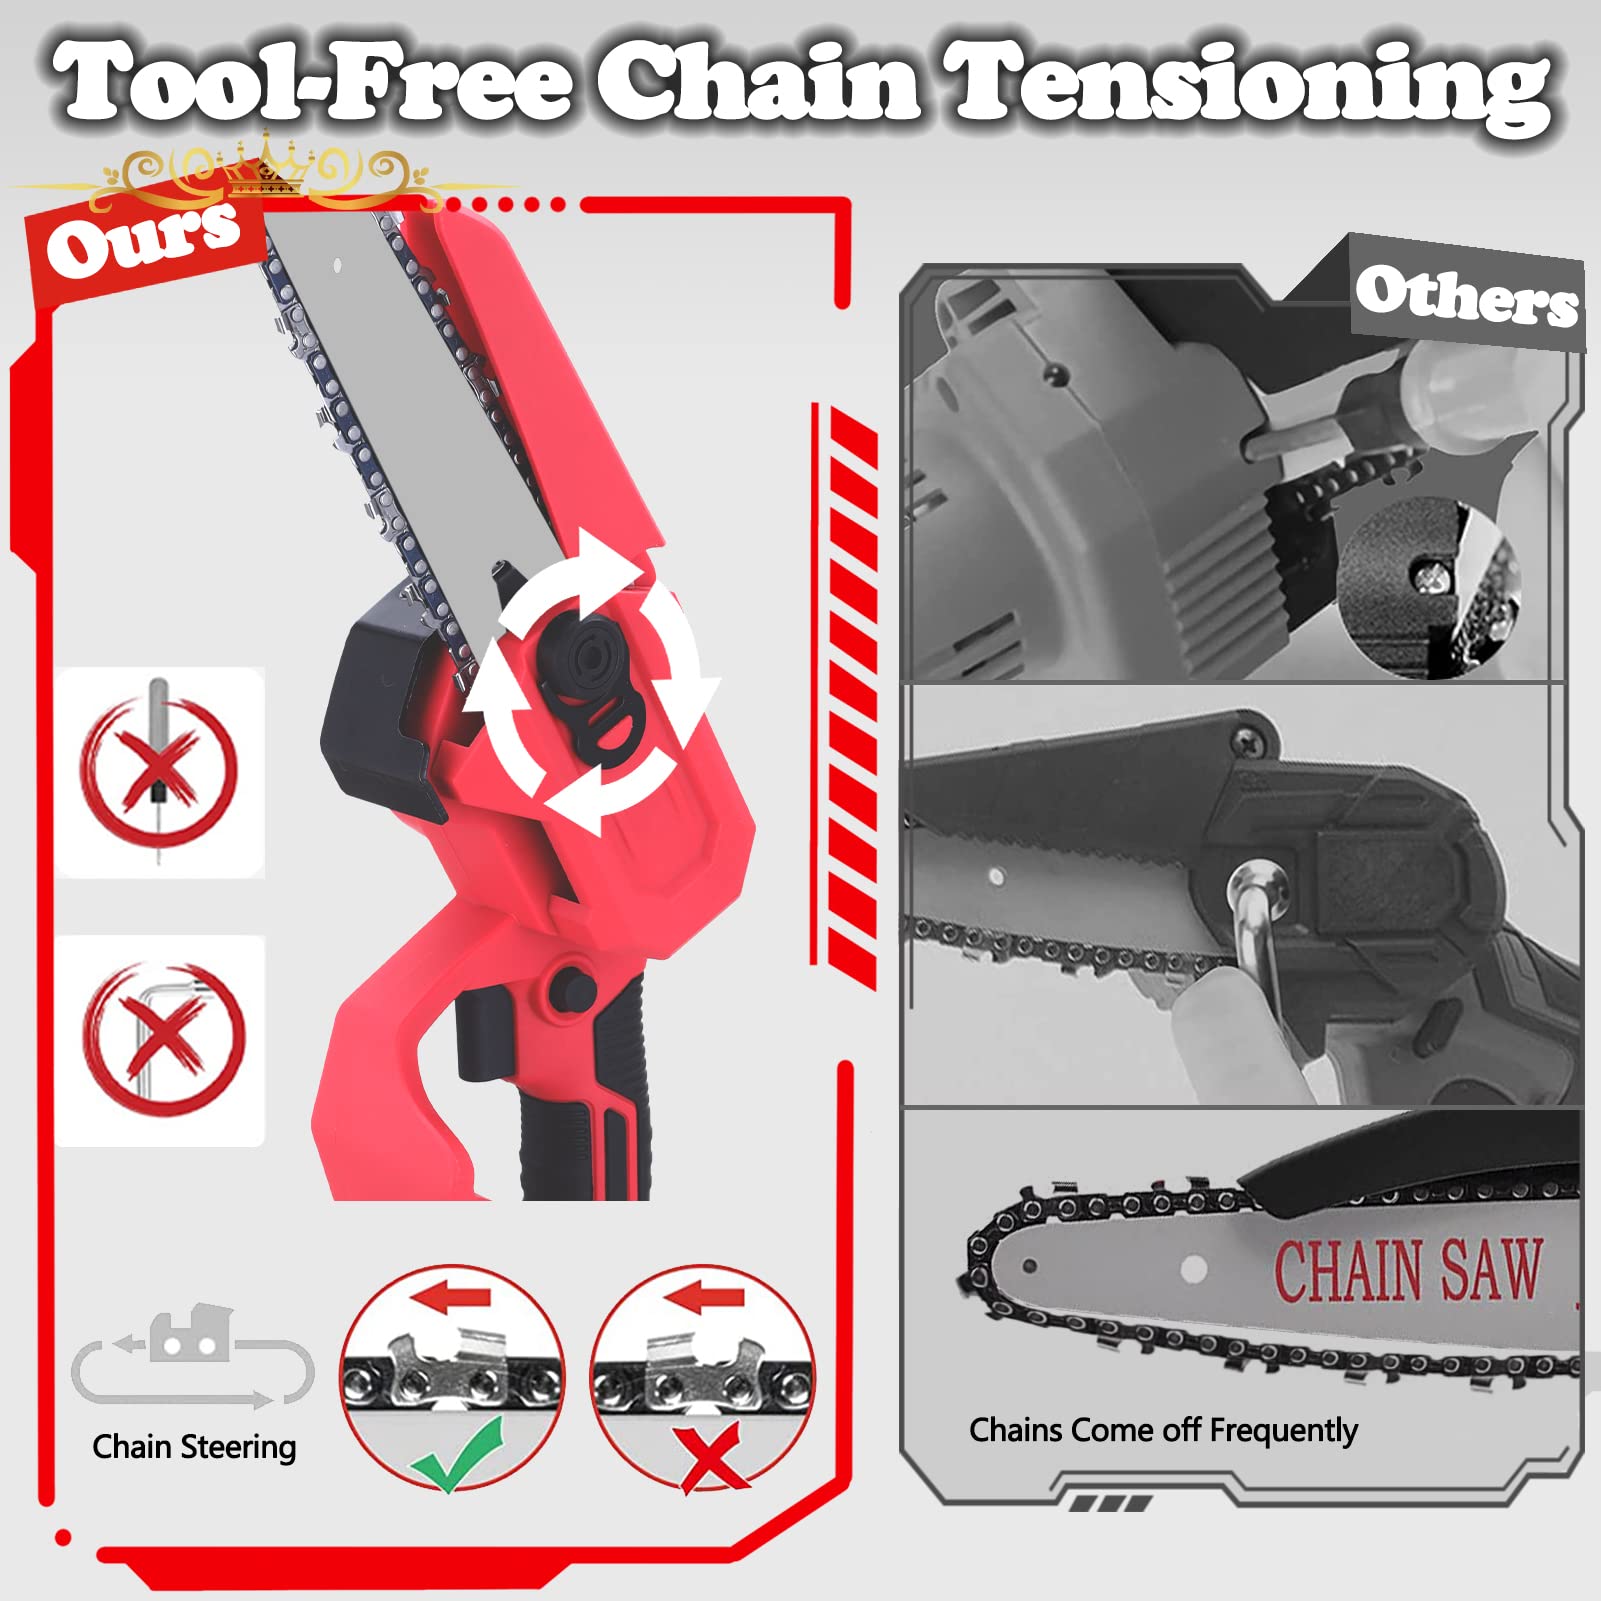 Mini Chainsaw Cordless 6 Inch BRUSHLESS Mini Chainsaw Battery Powered Chainsaw Kit, Small Handheld Cordless Chainsaw with Battery and Charger, 2.6lb Lightweight Portable Chainsaw for Tree Trimming